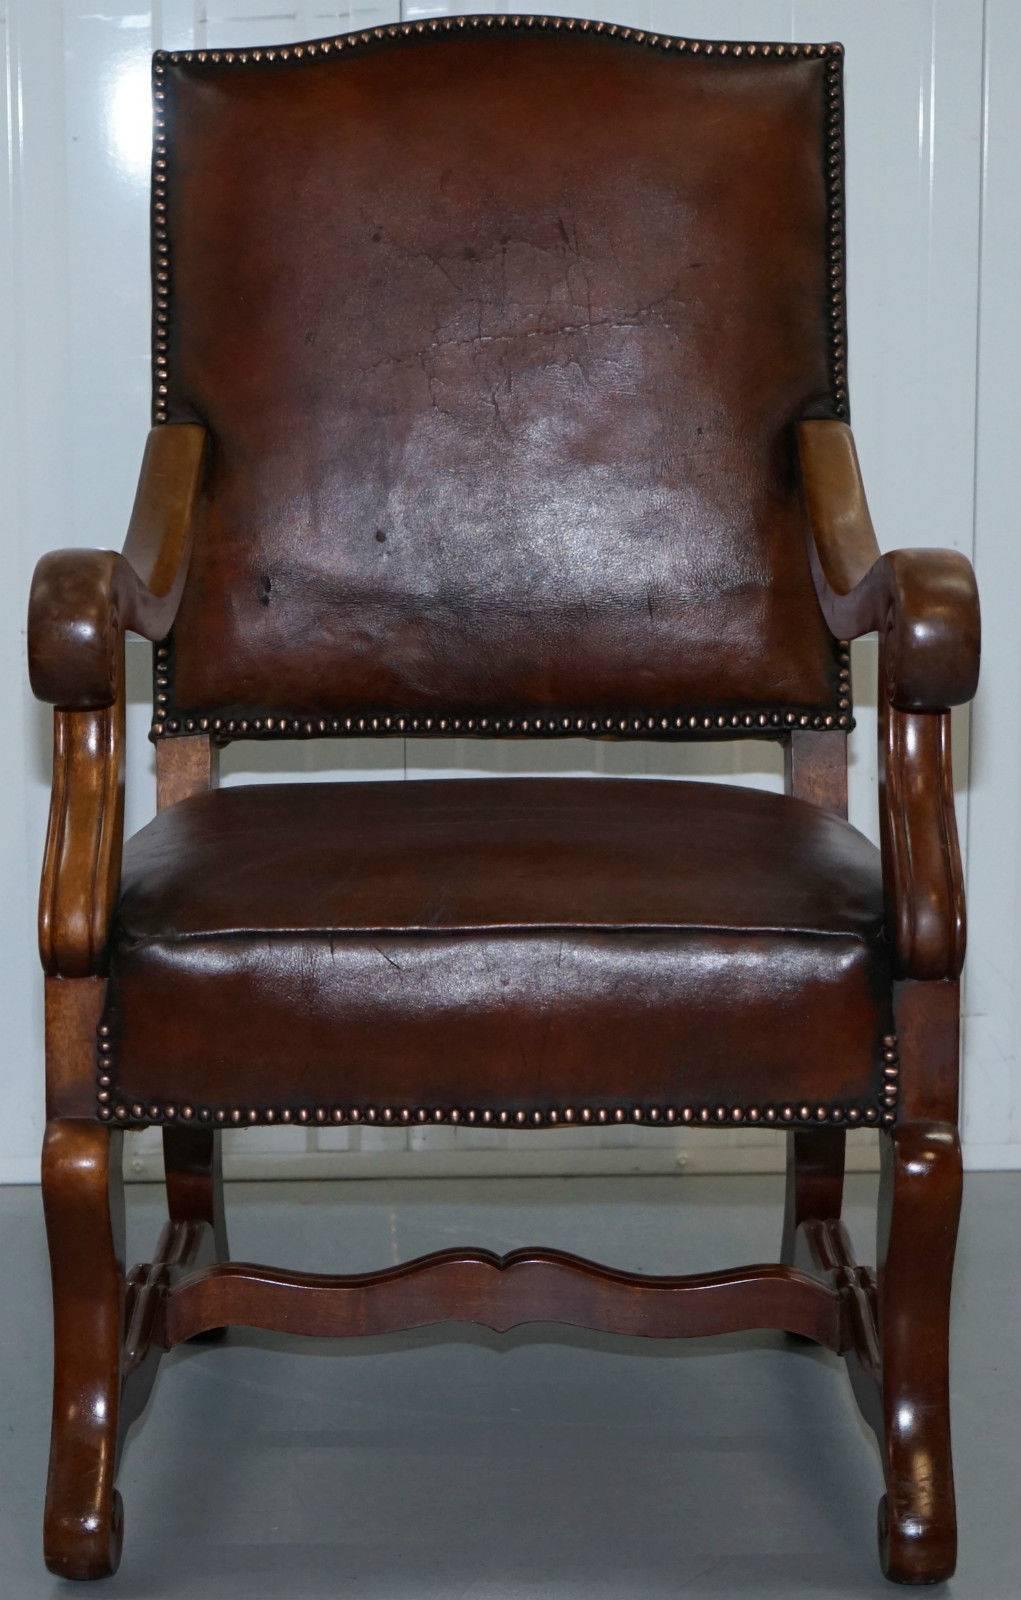 We are delighted to offer for sale this stunning pair of 19th century late Victorian Carolean throne armchairs in fully restored condition

These chairs are absolutely stunning, they were restored in the 1950s to include new leather upholstery and